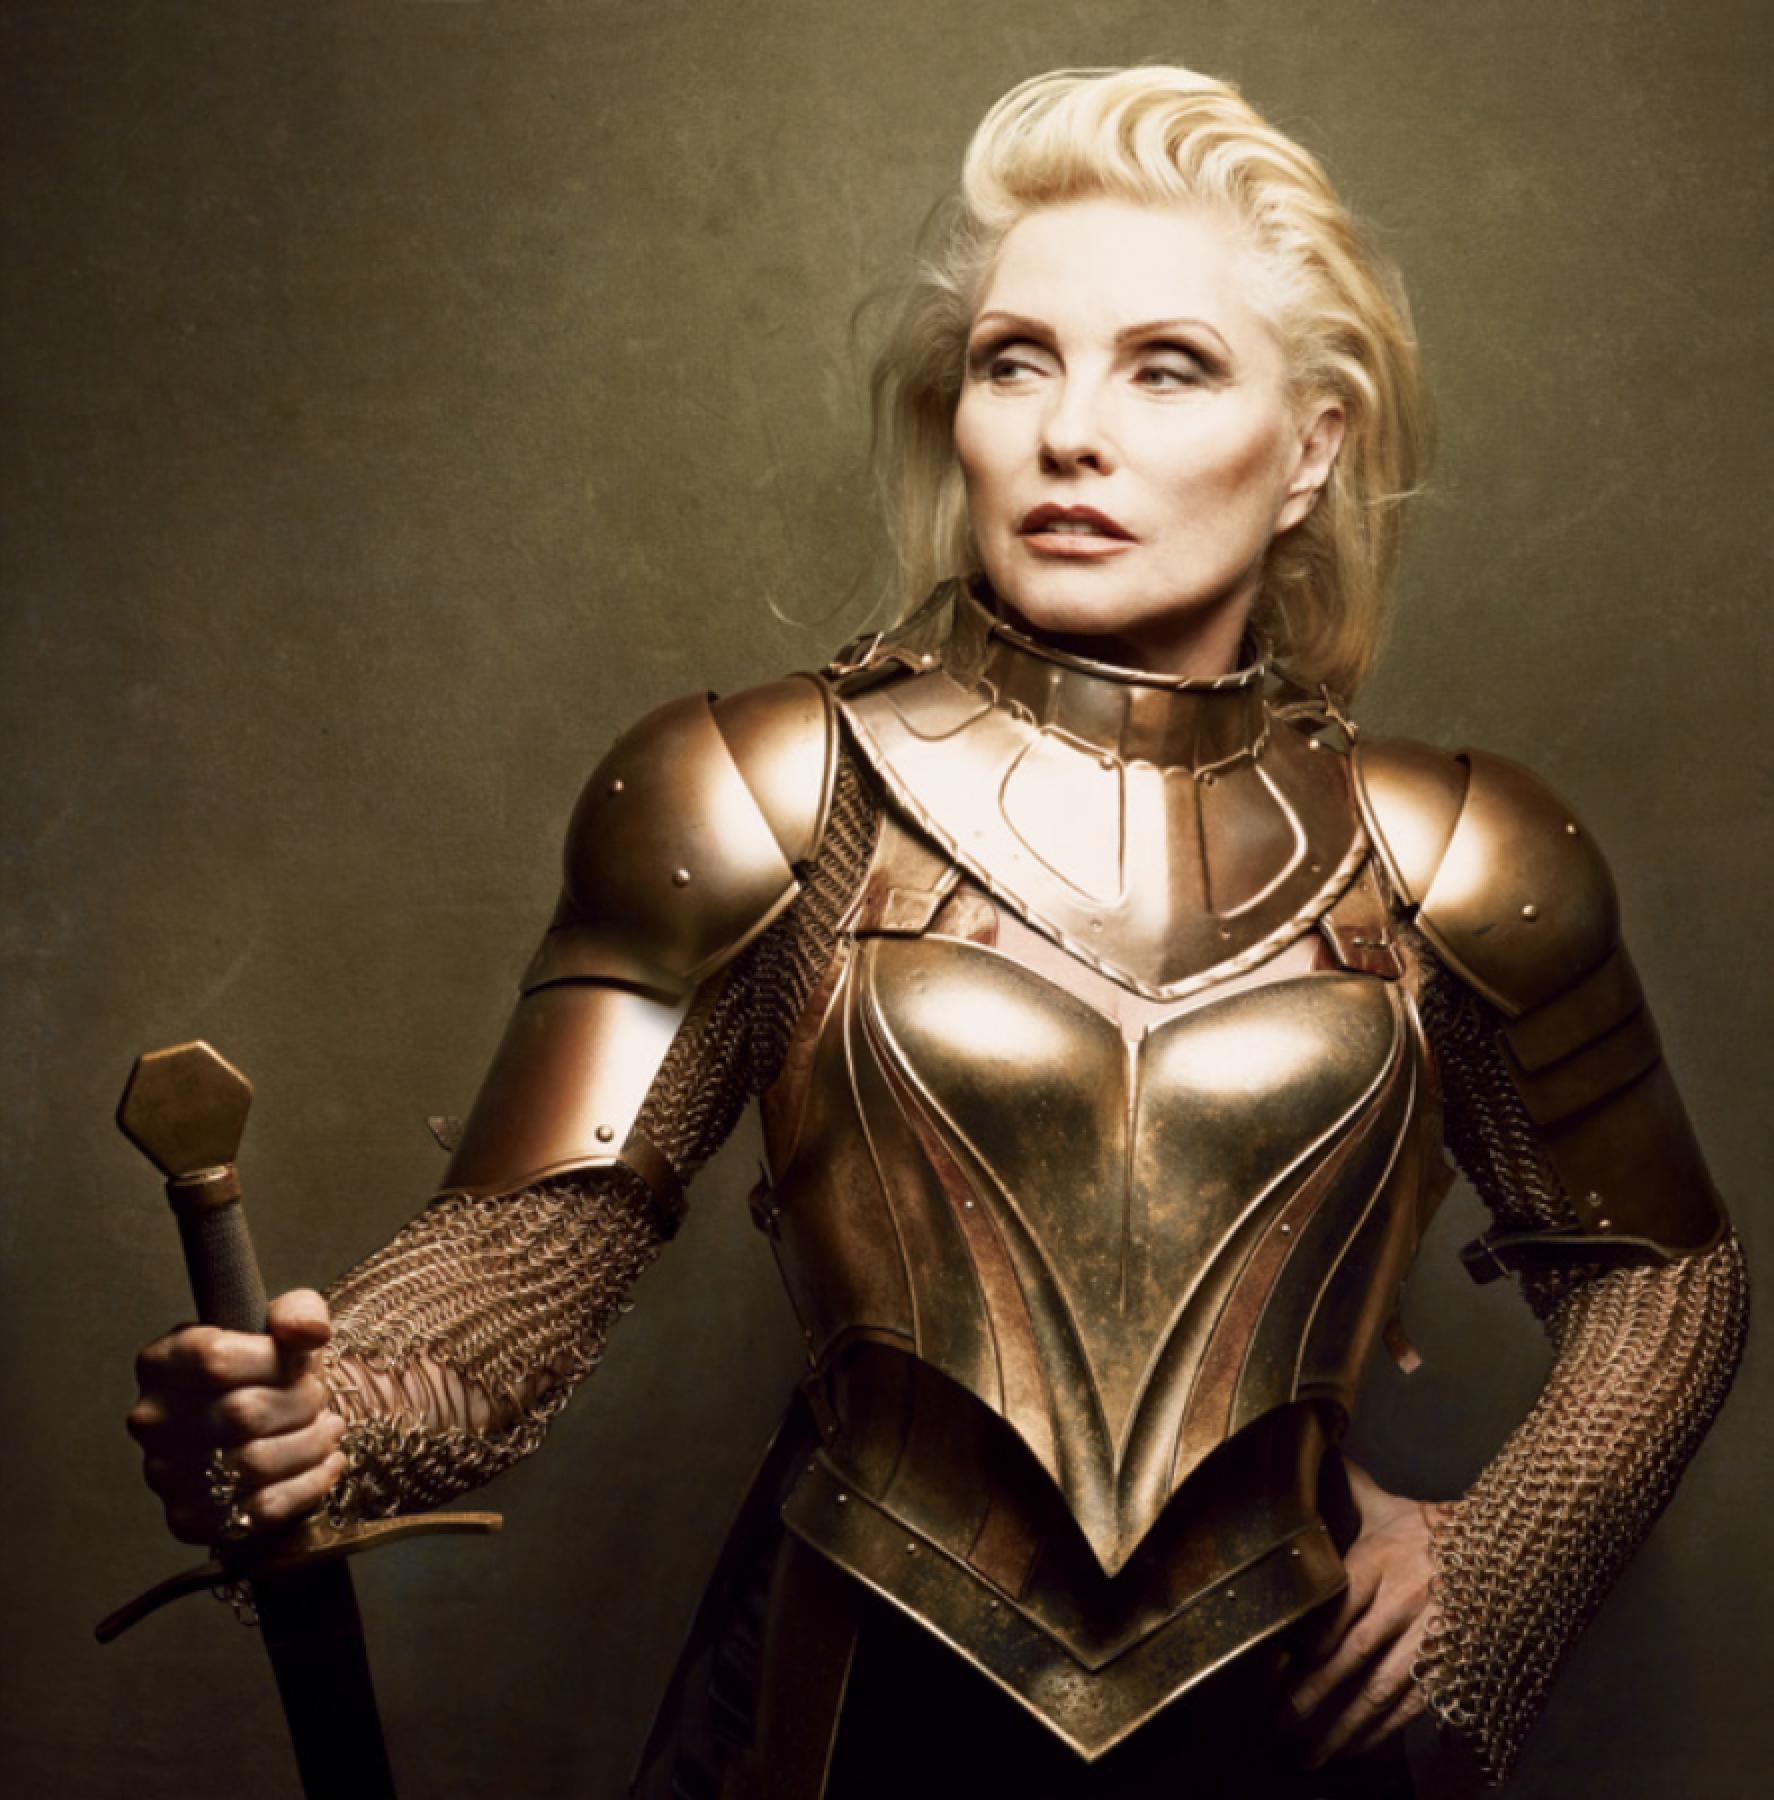 Debbie Harry by Annie Leibovitz (Produced with Kathryn MacLeod)